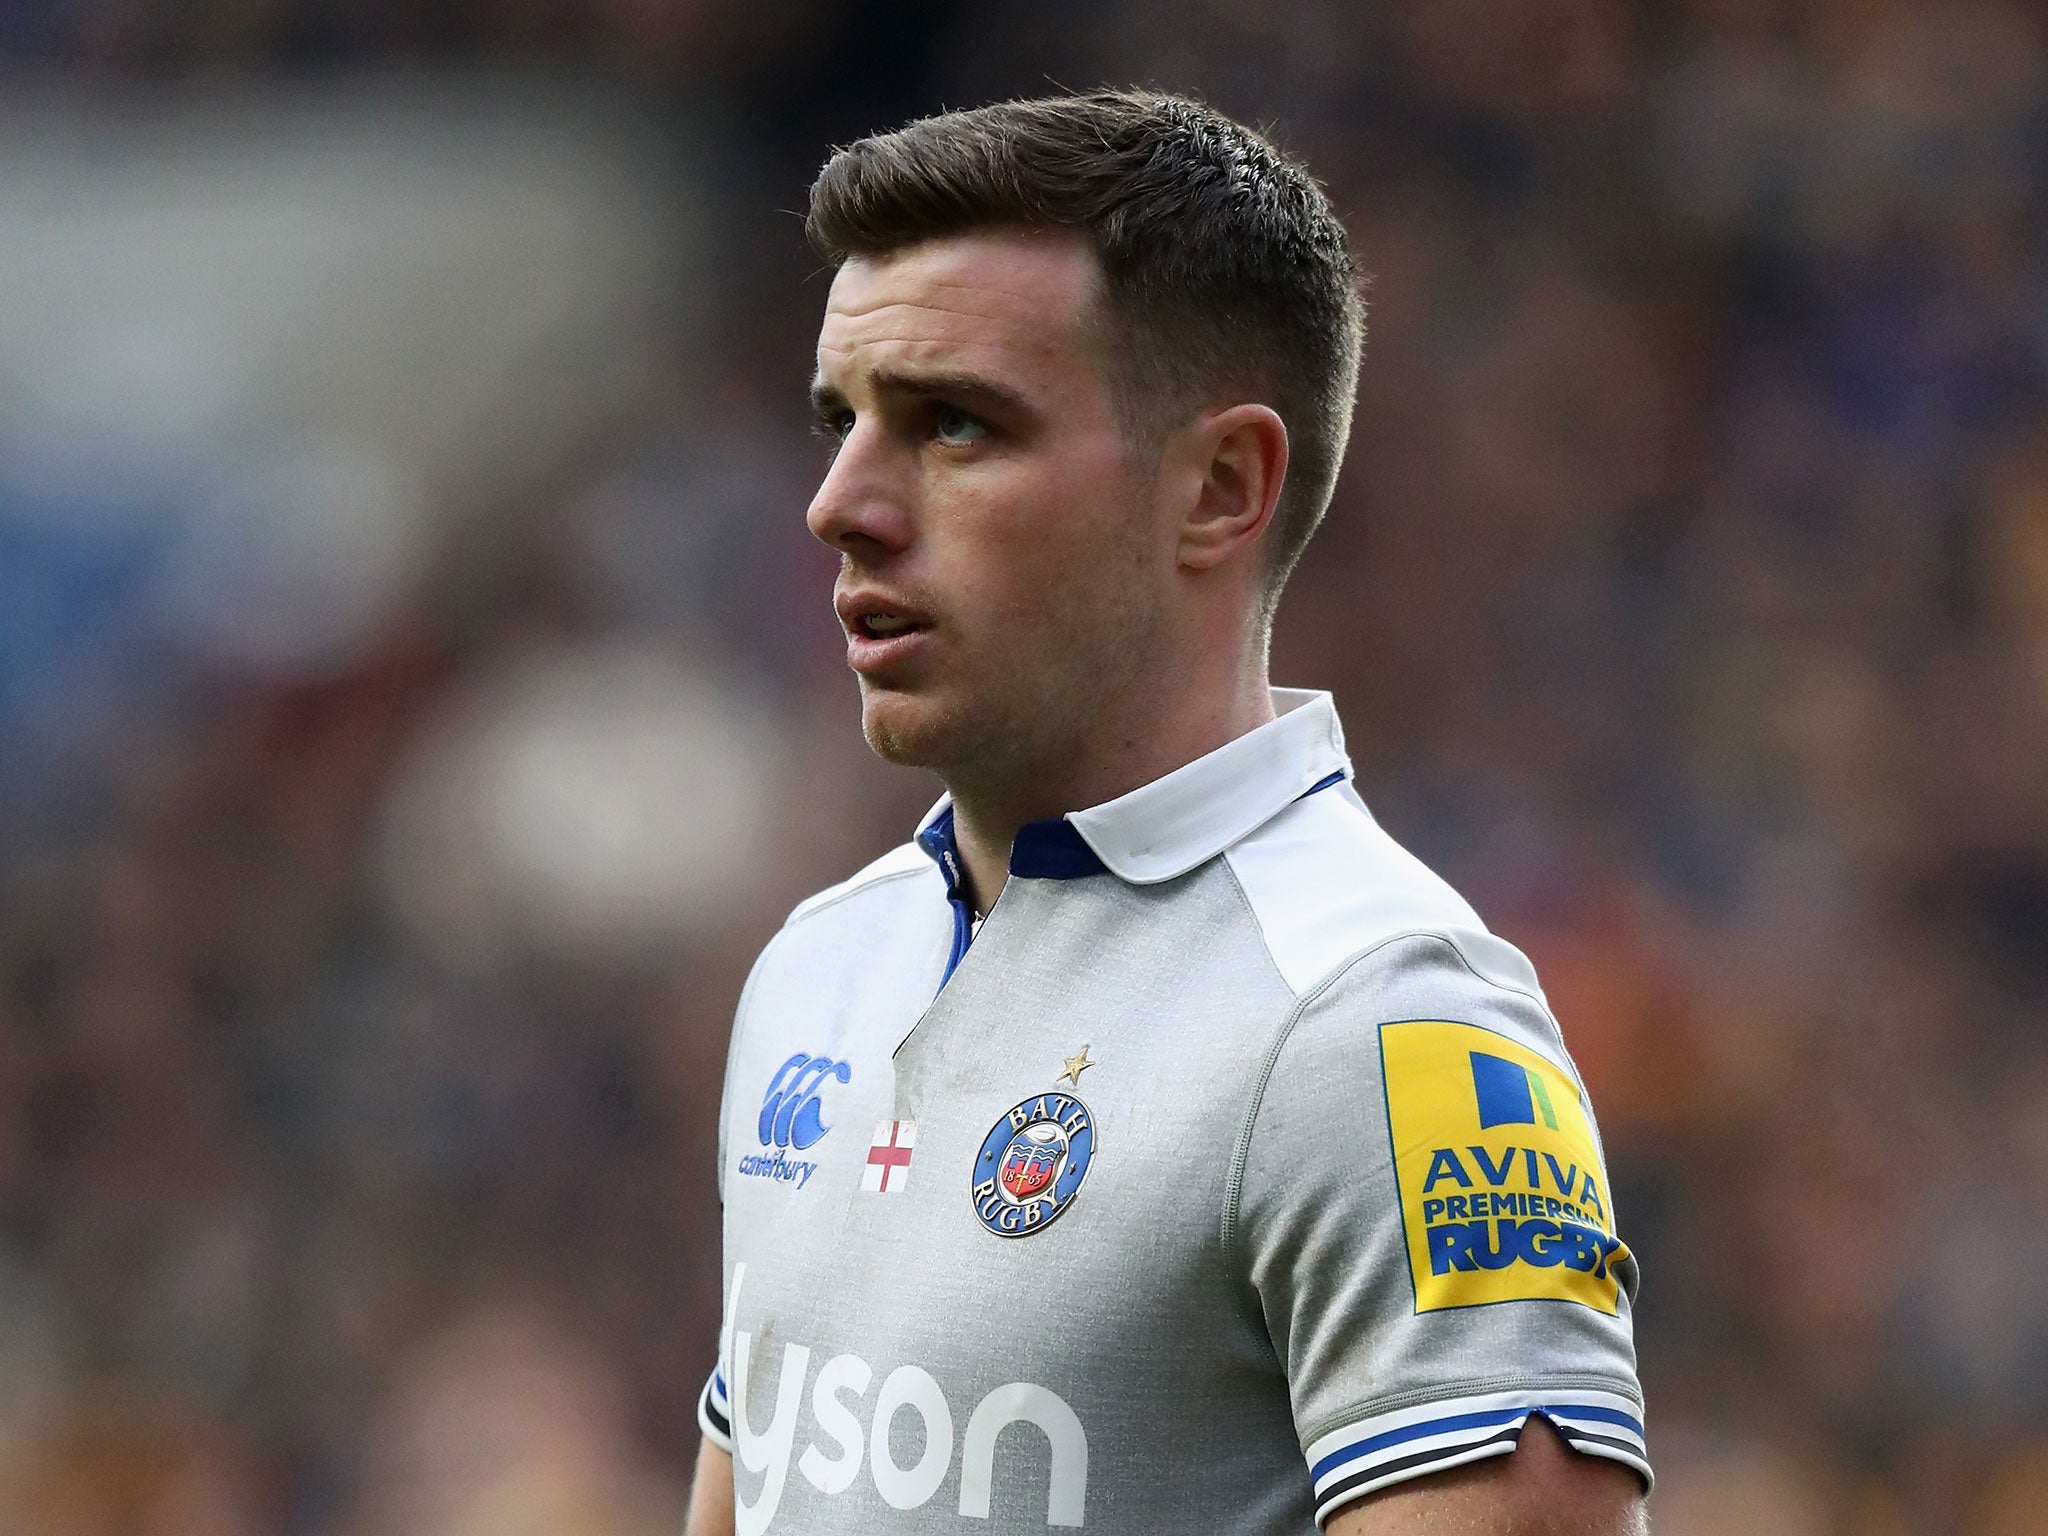 Leicester have re-signed England fly-half George Ford from next season